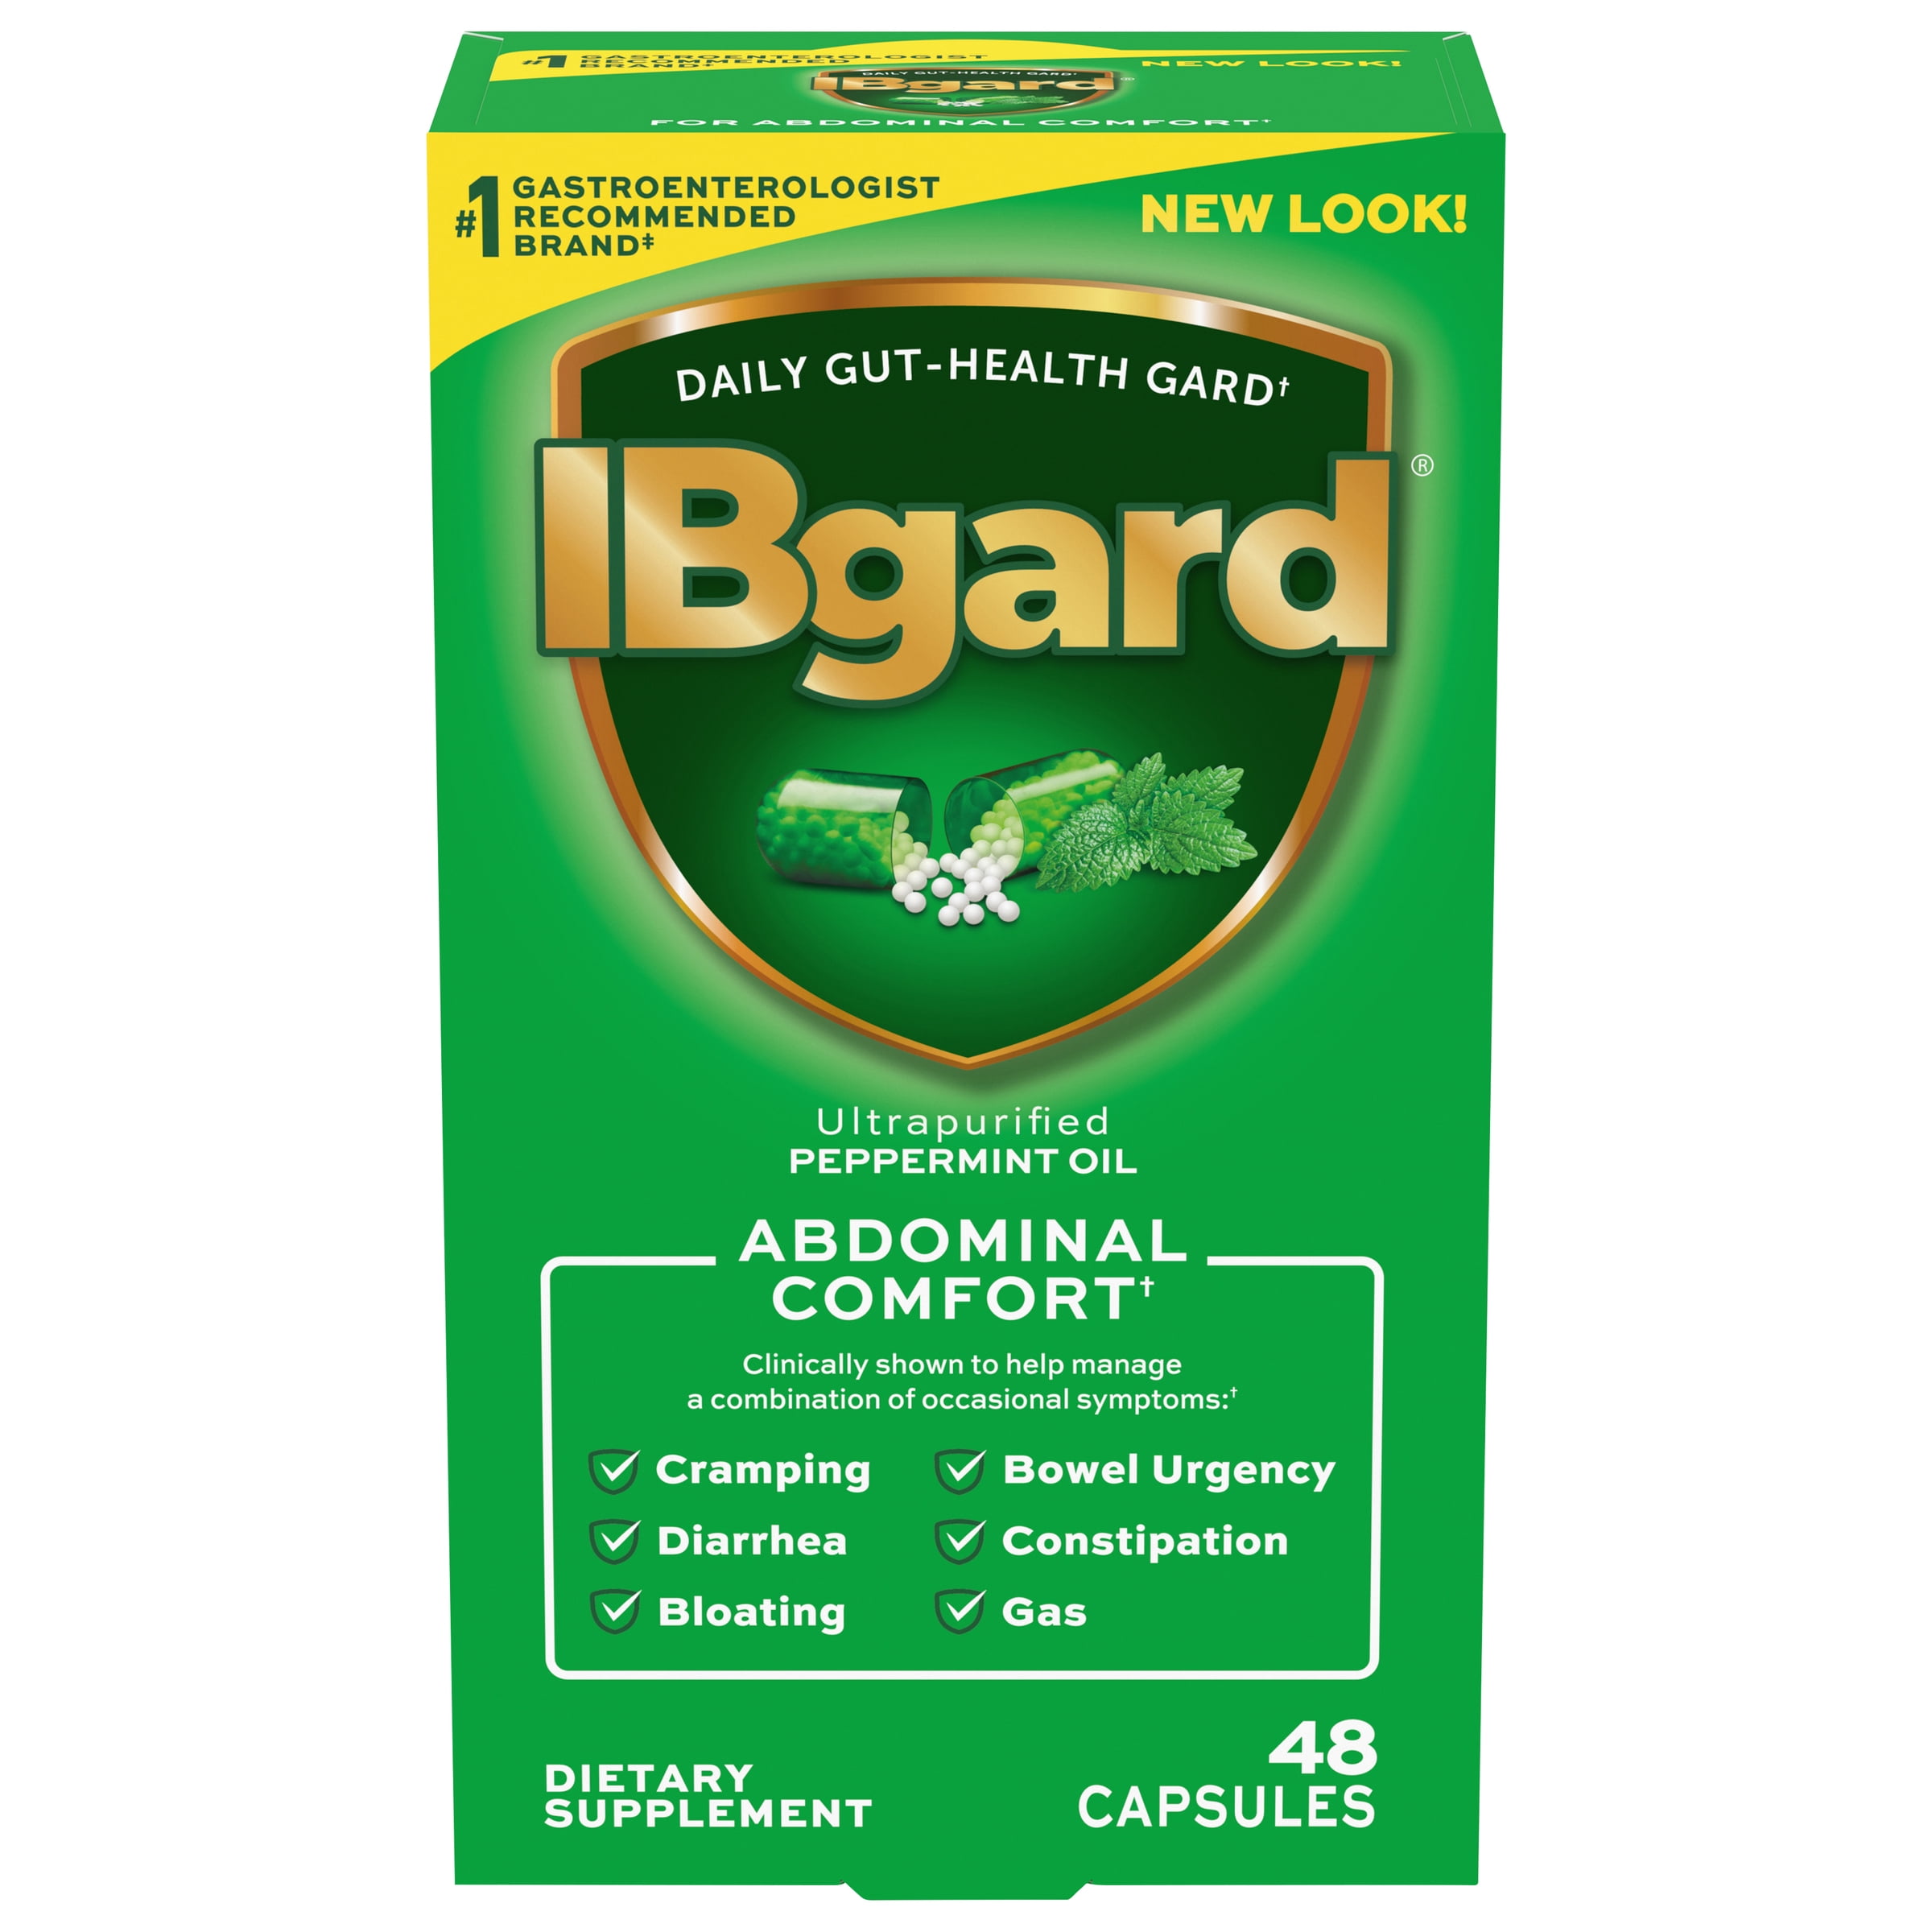 IBgard Daily Gut Health Support Dietary Supplement, 48 Capsules